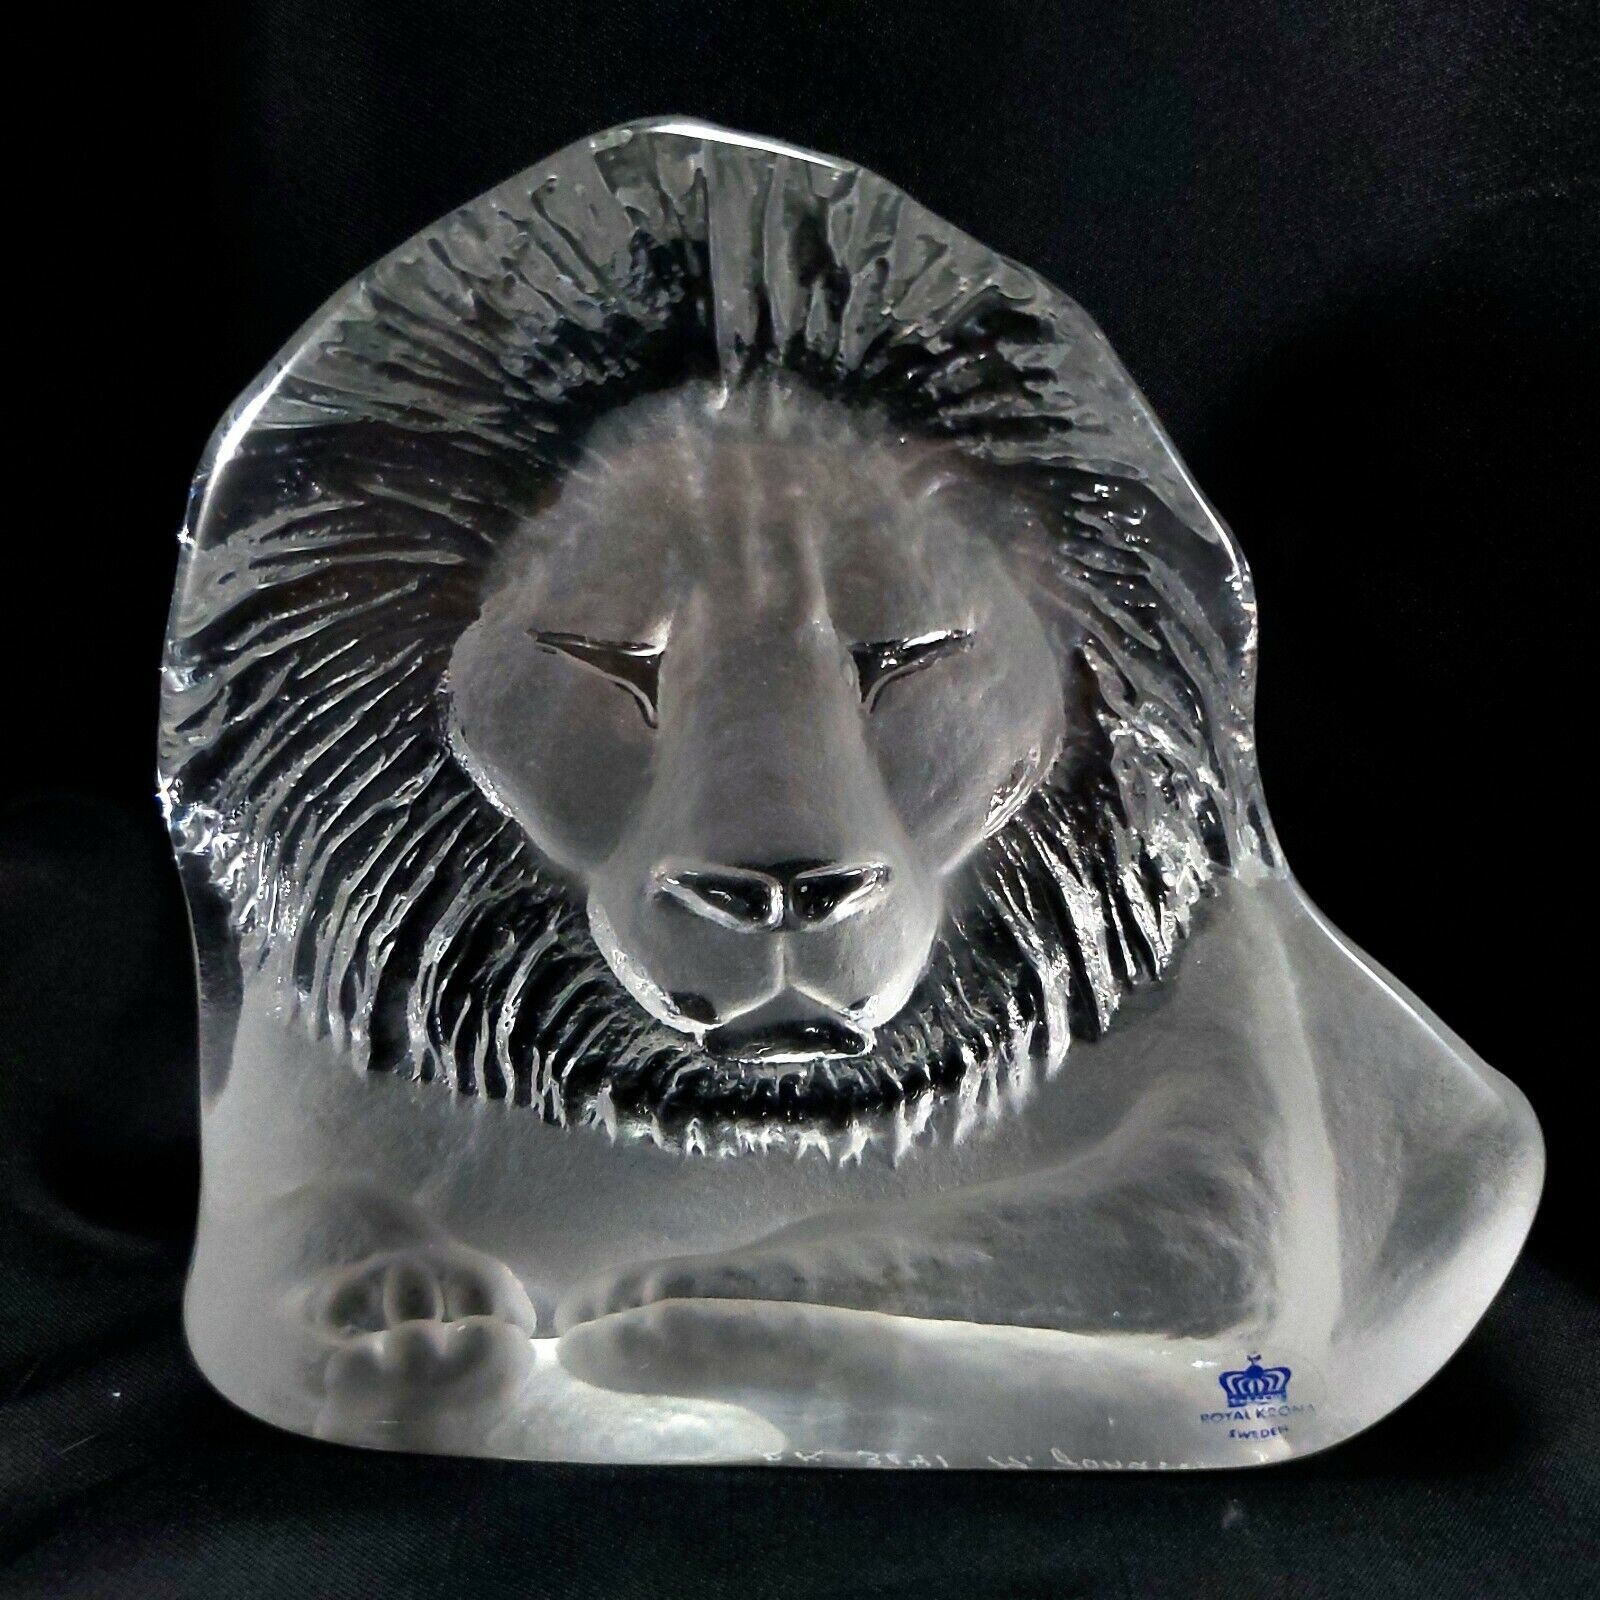 Primary image for Mats Jonasson Lion Sculpture 5.5" Crystal Paperweight Royal Krona 3141